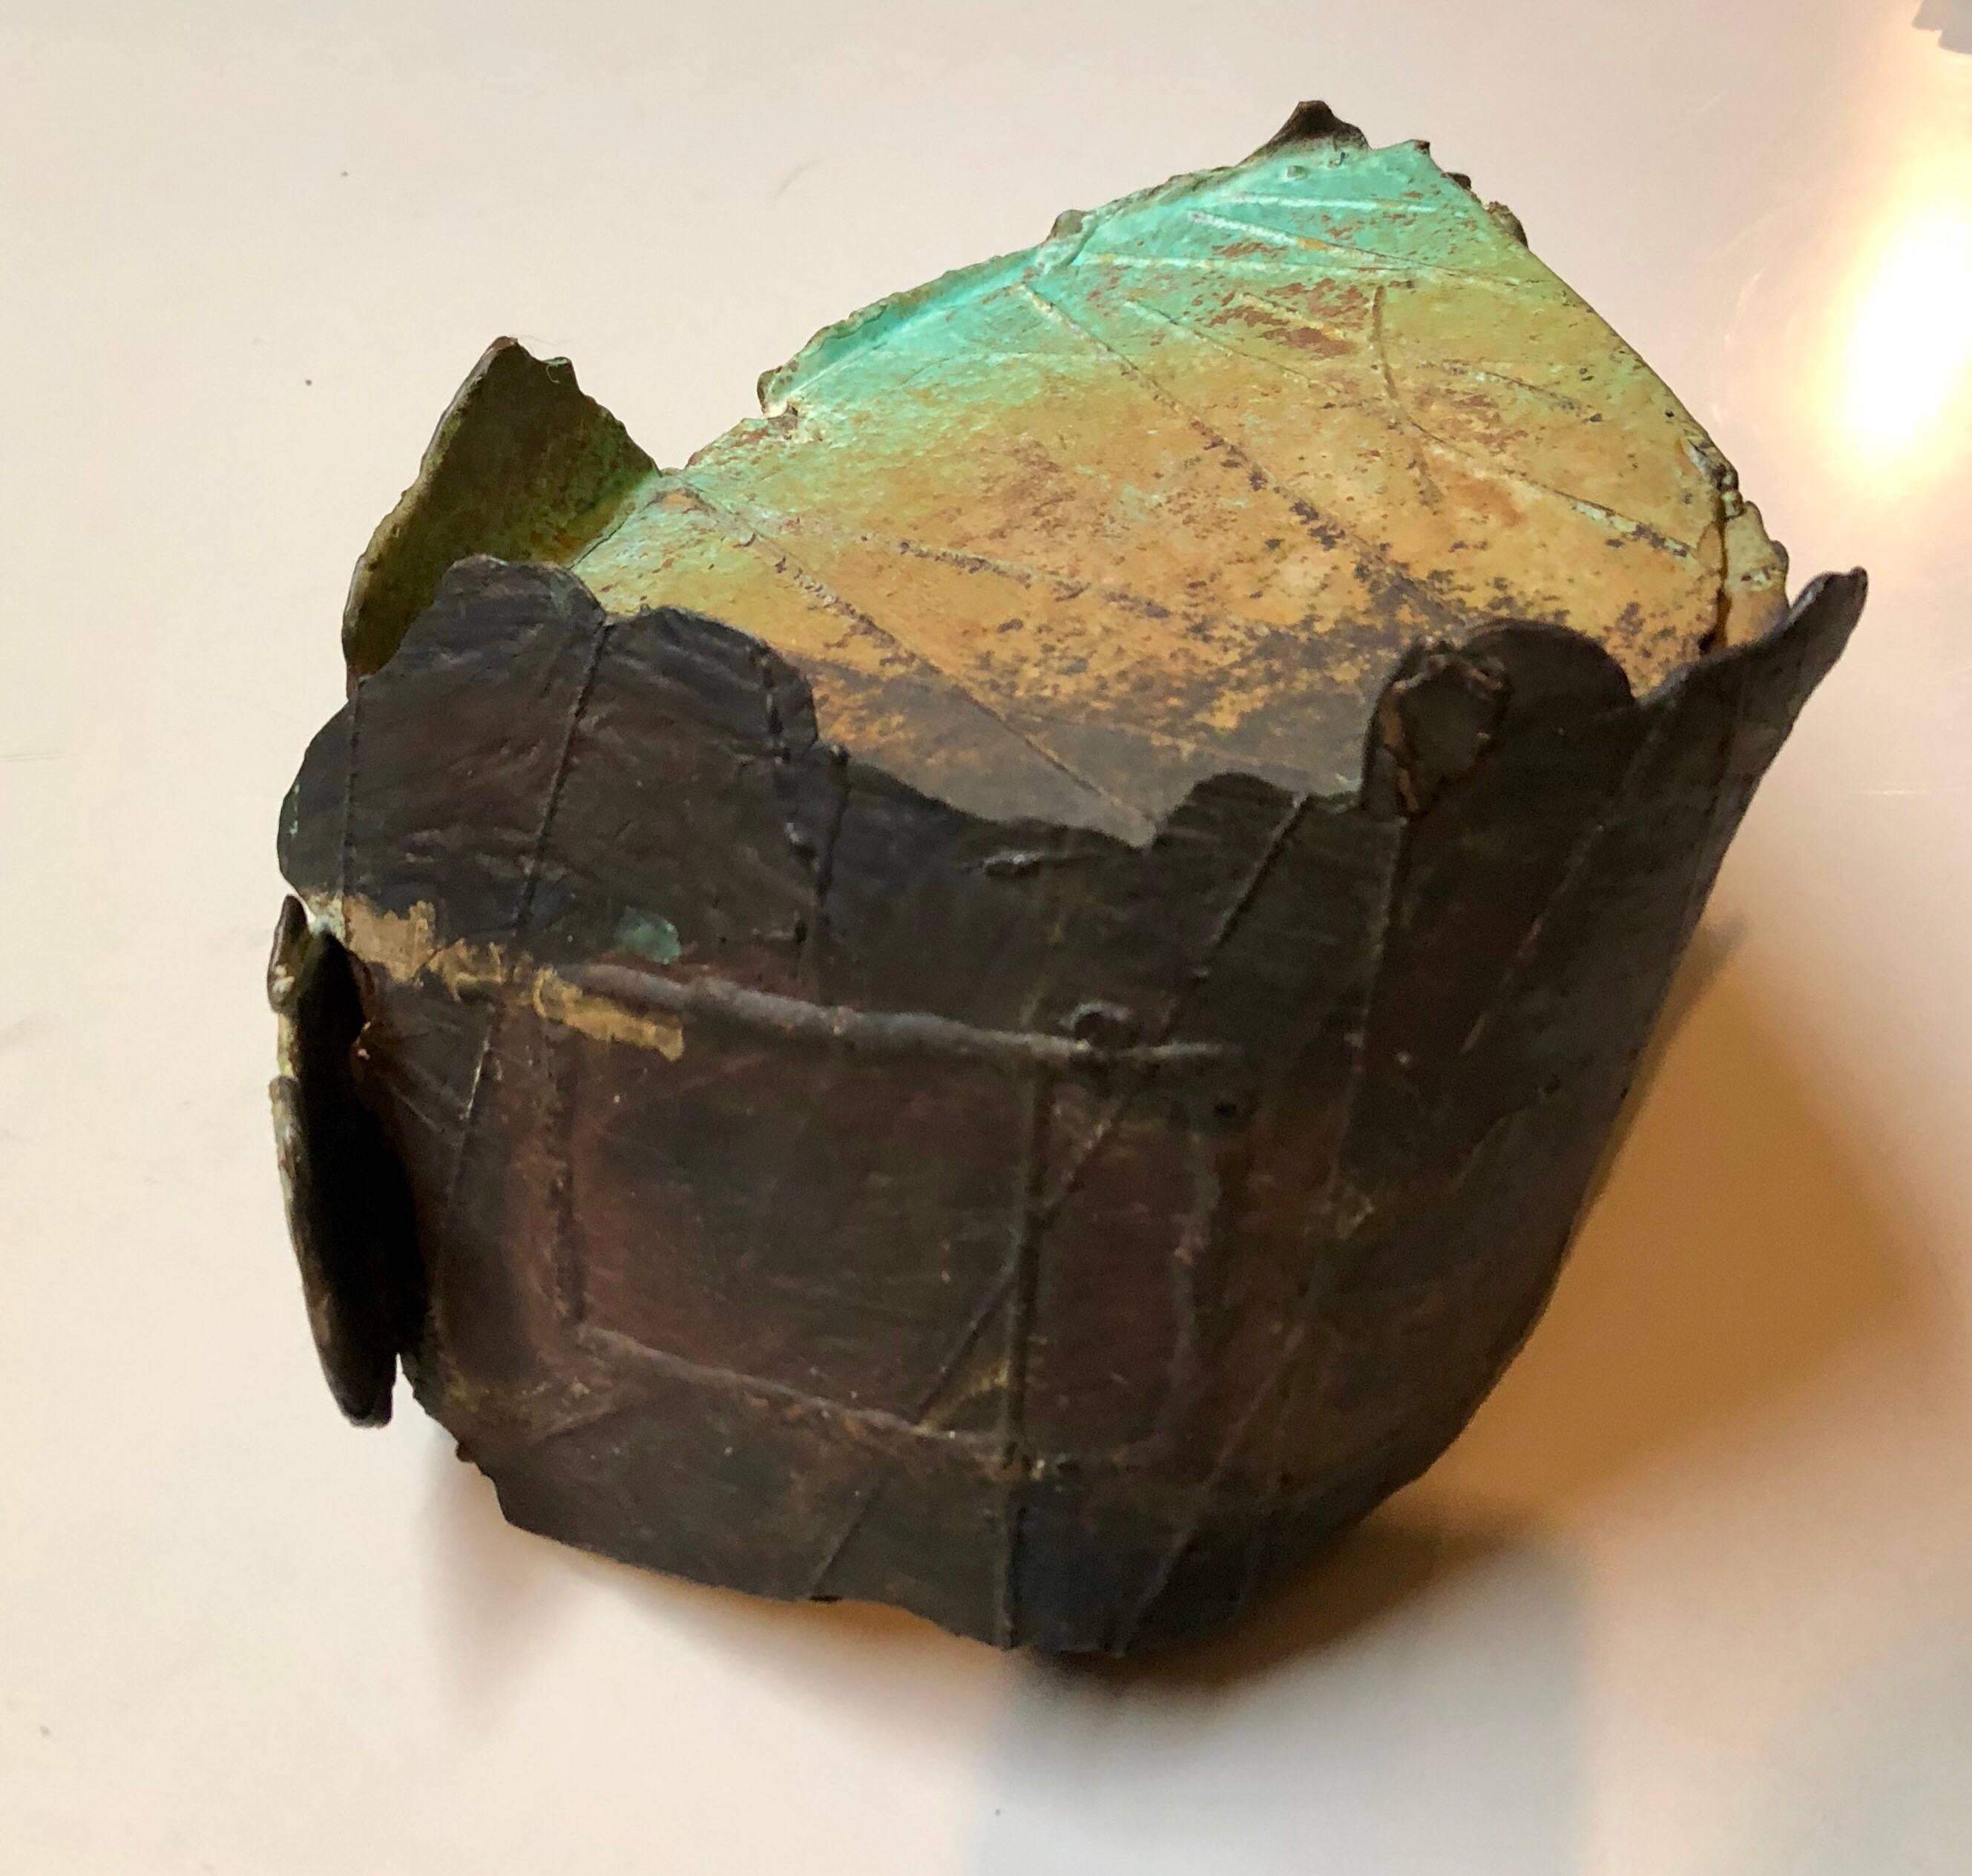 It has a variegated patina and texture to it. It does not appear to be signed. It was exhibited at Patricia Sweetow gallery in San Francisco.


Dennis Leon, was a San Francisco Bay Area sculptor and art instructor
Mr. Leon was chairman of the